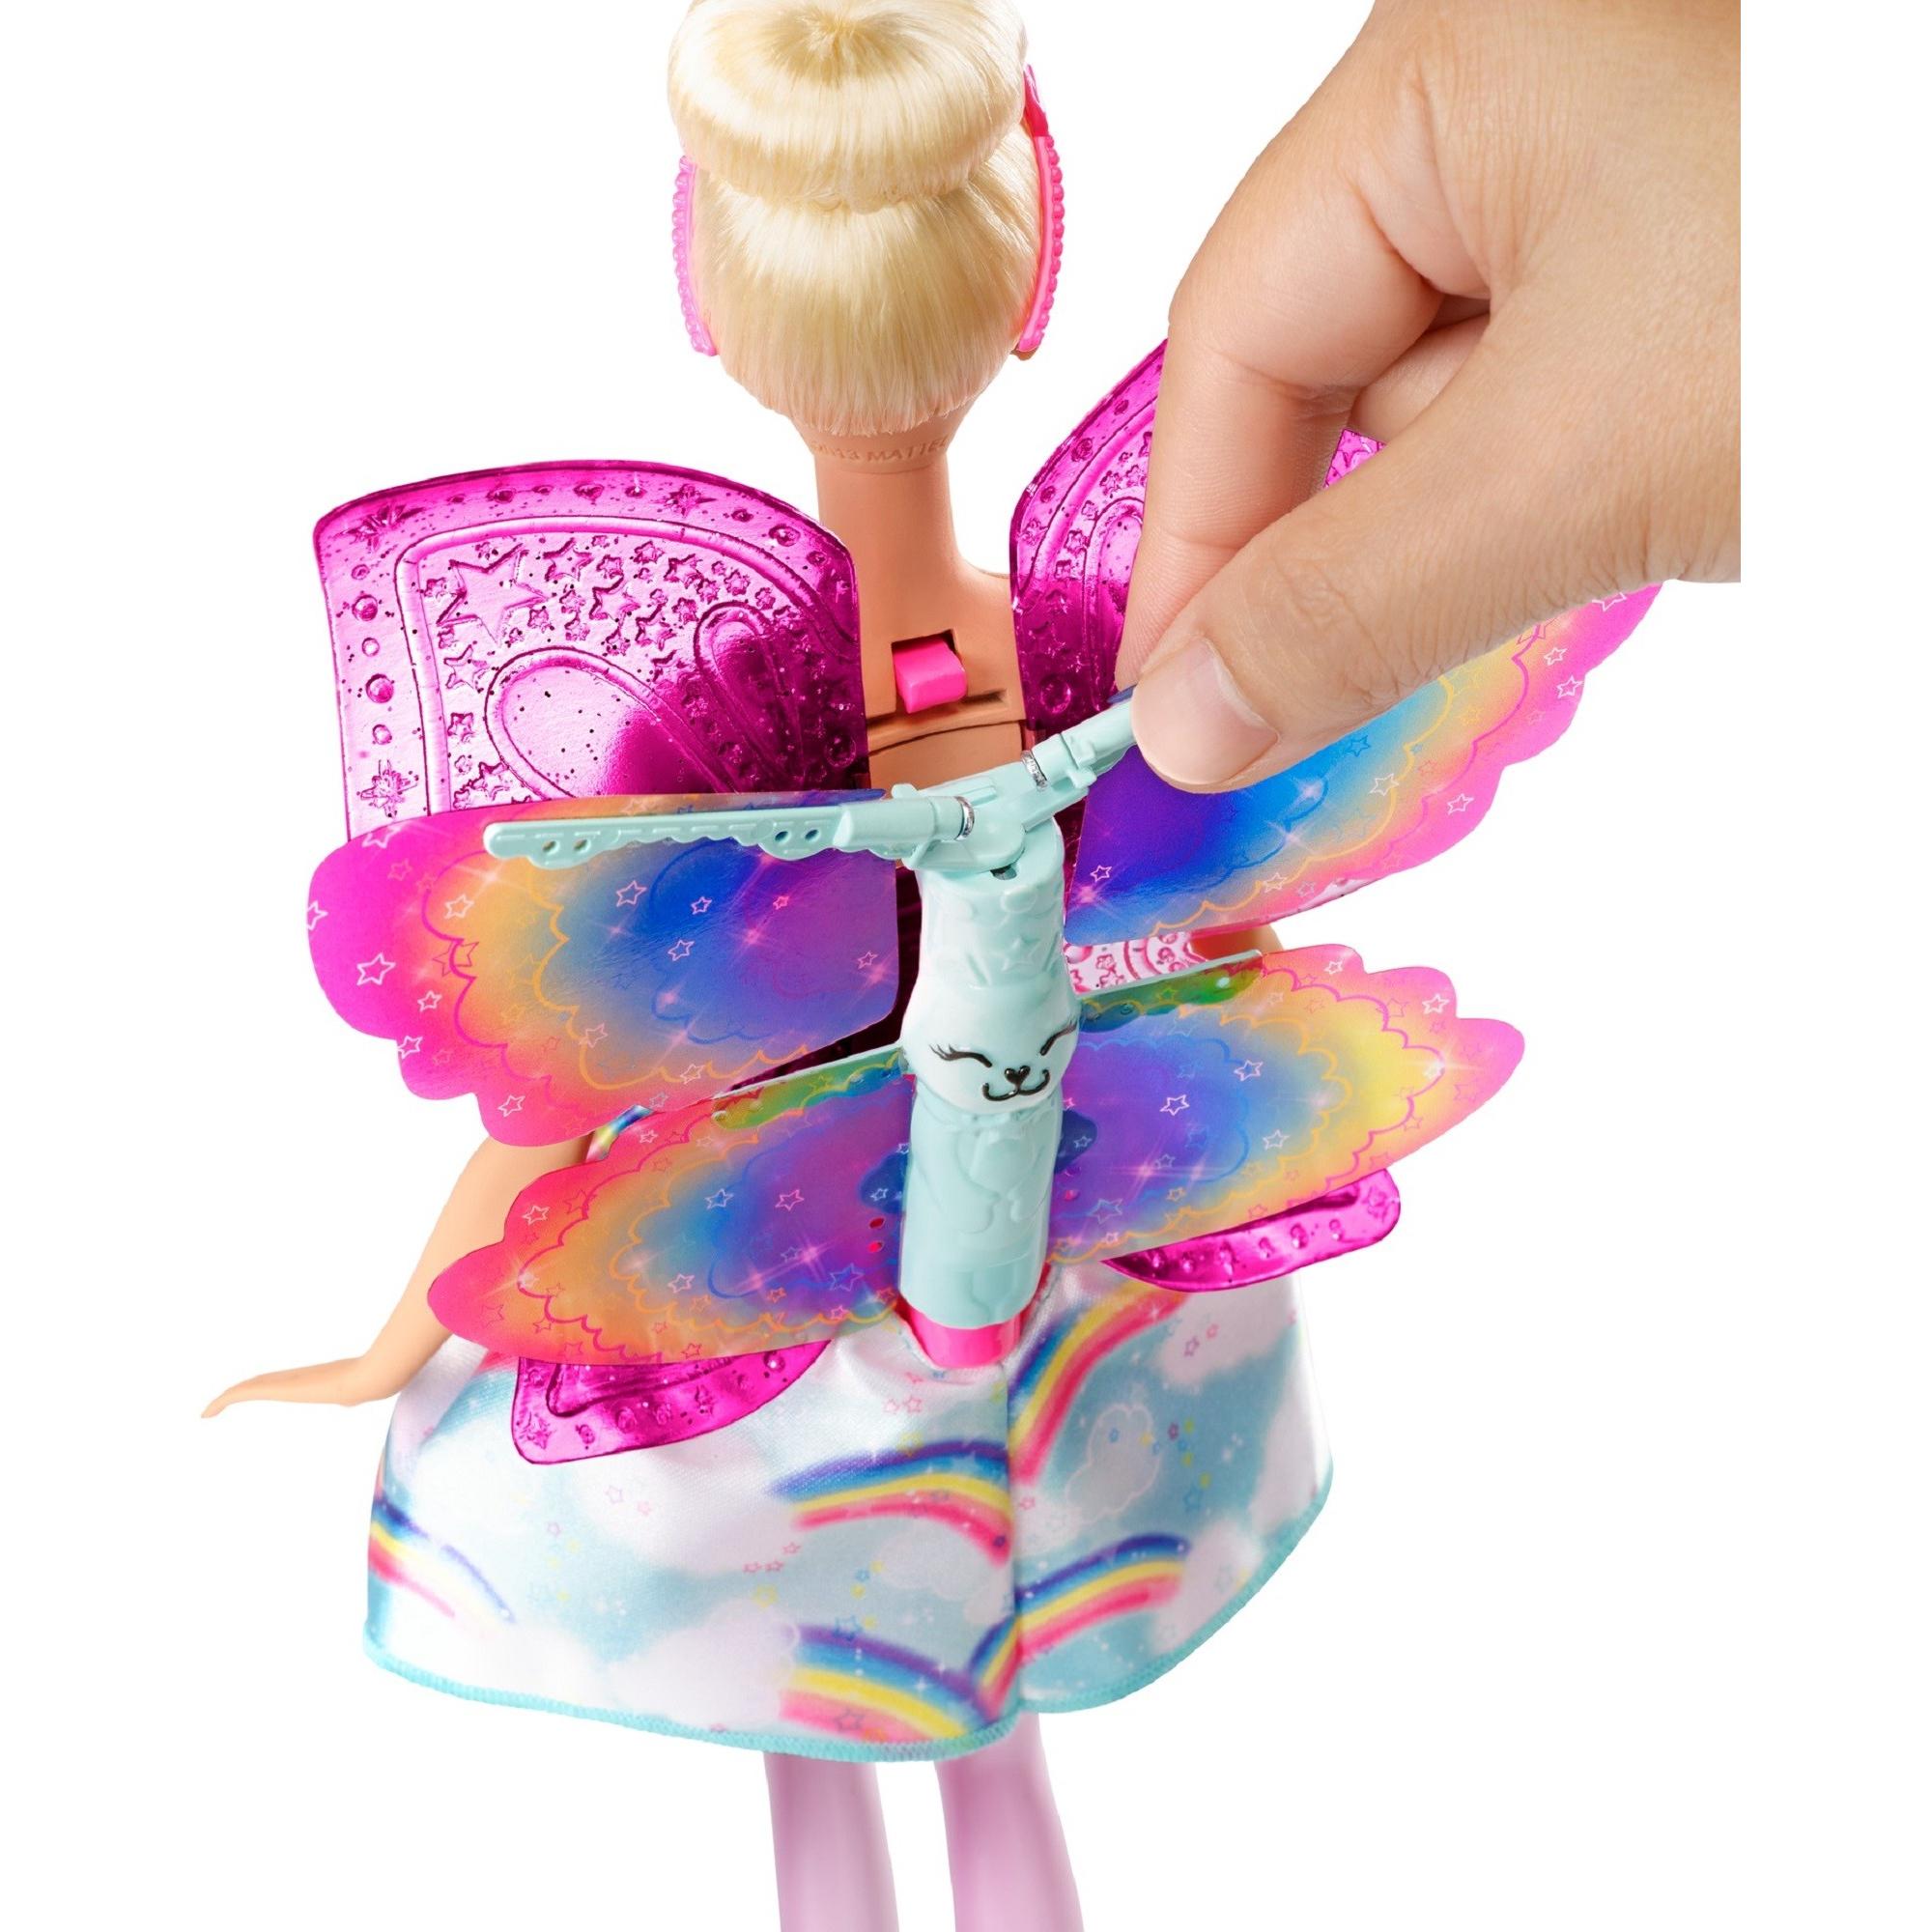 Barbie Dreamtopia Flying Wings Fairy Doll with Blonde Hair - image 5 of 11